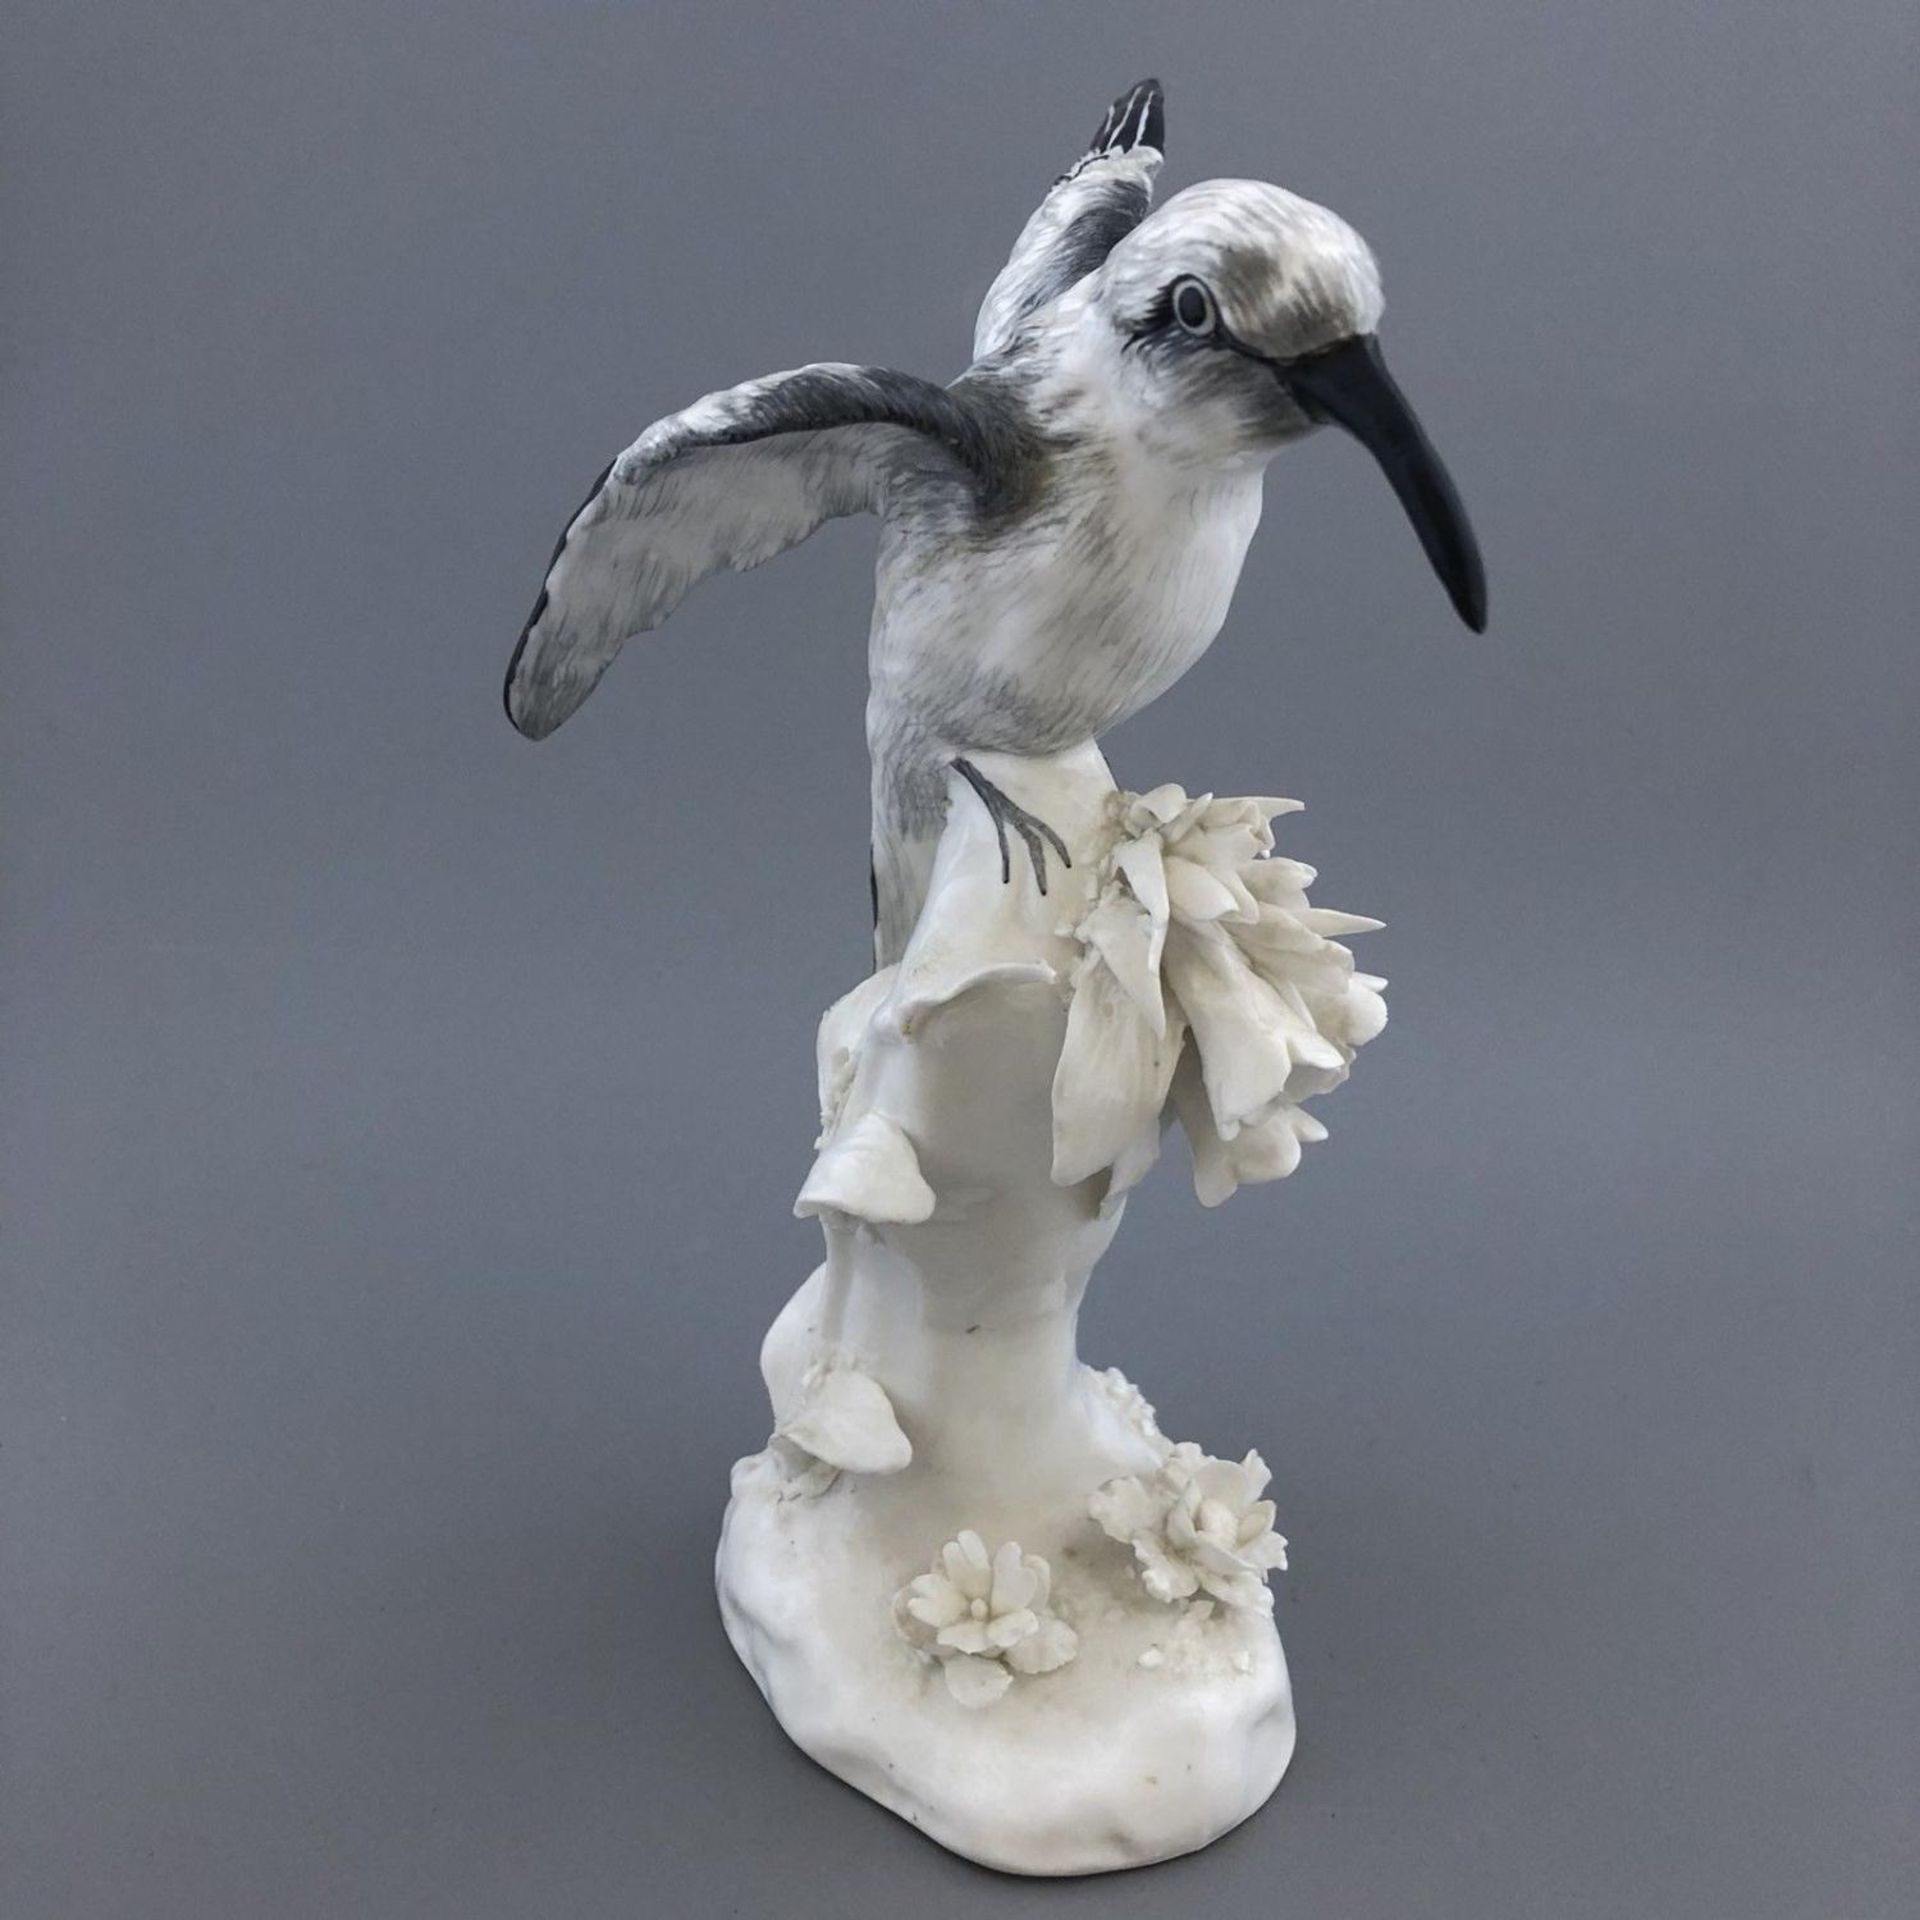 English Porcelain Bee Eater Bird Figurine by J T Jones for Crown Staffordshire - Image 2 of 6